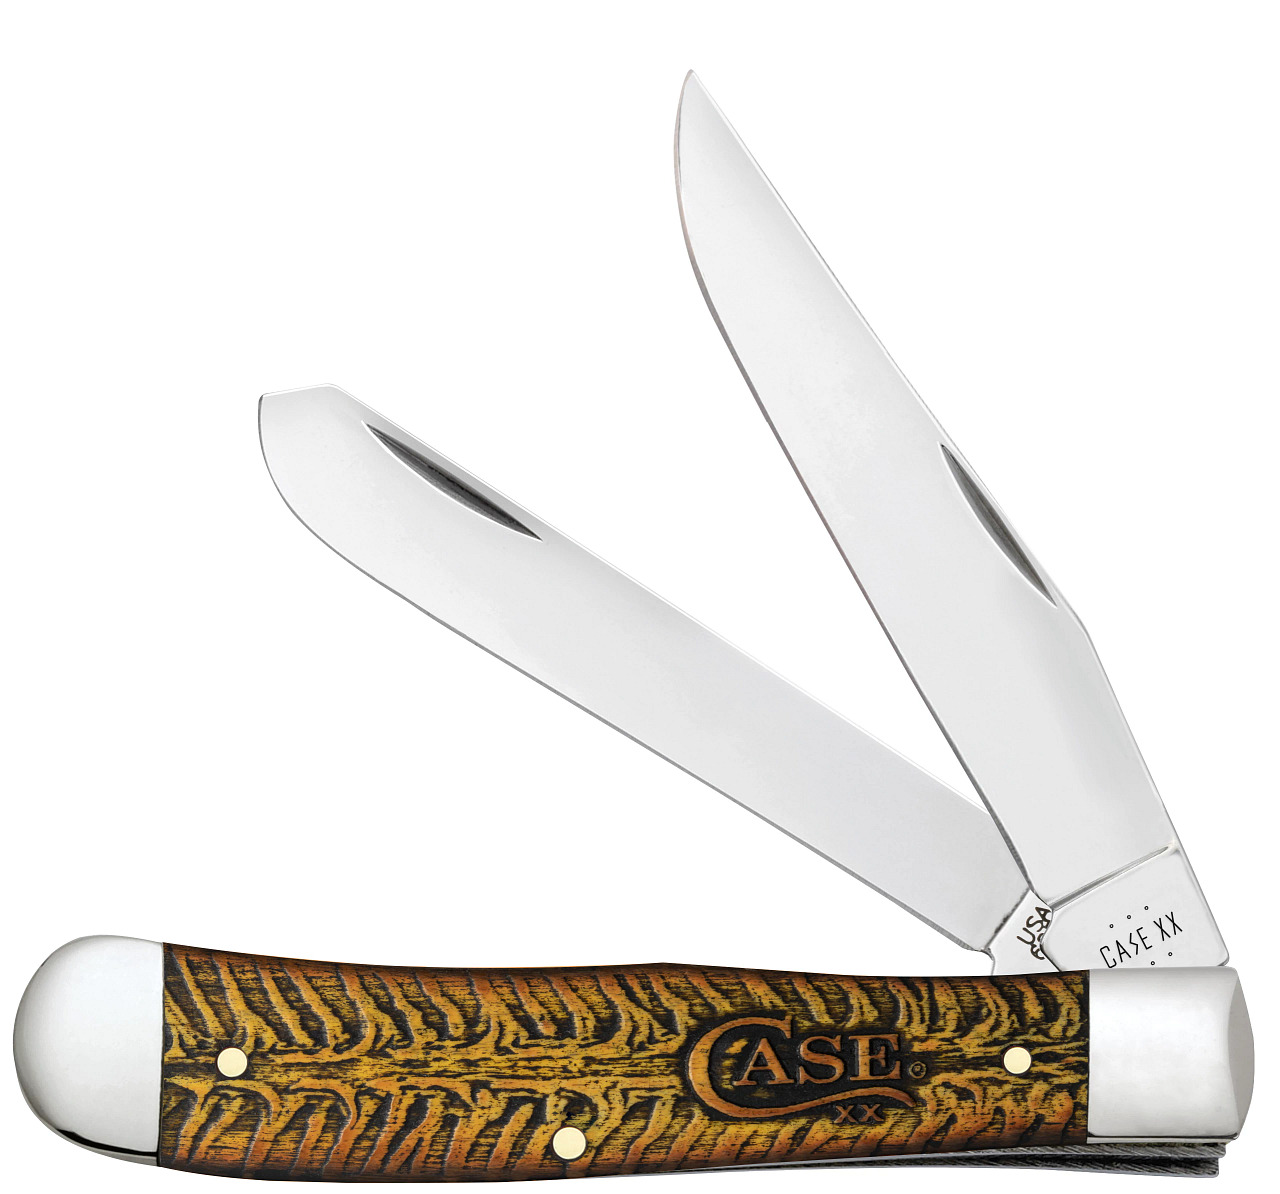 Case XX Knives Trapper Golden Pinecone 81800 Stainless Steel Pocket Knife